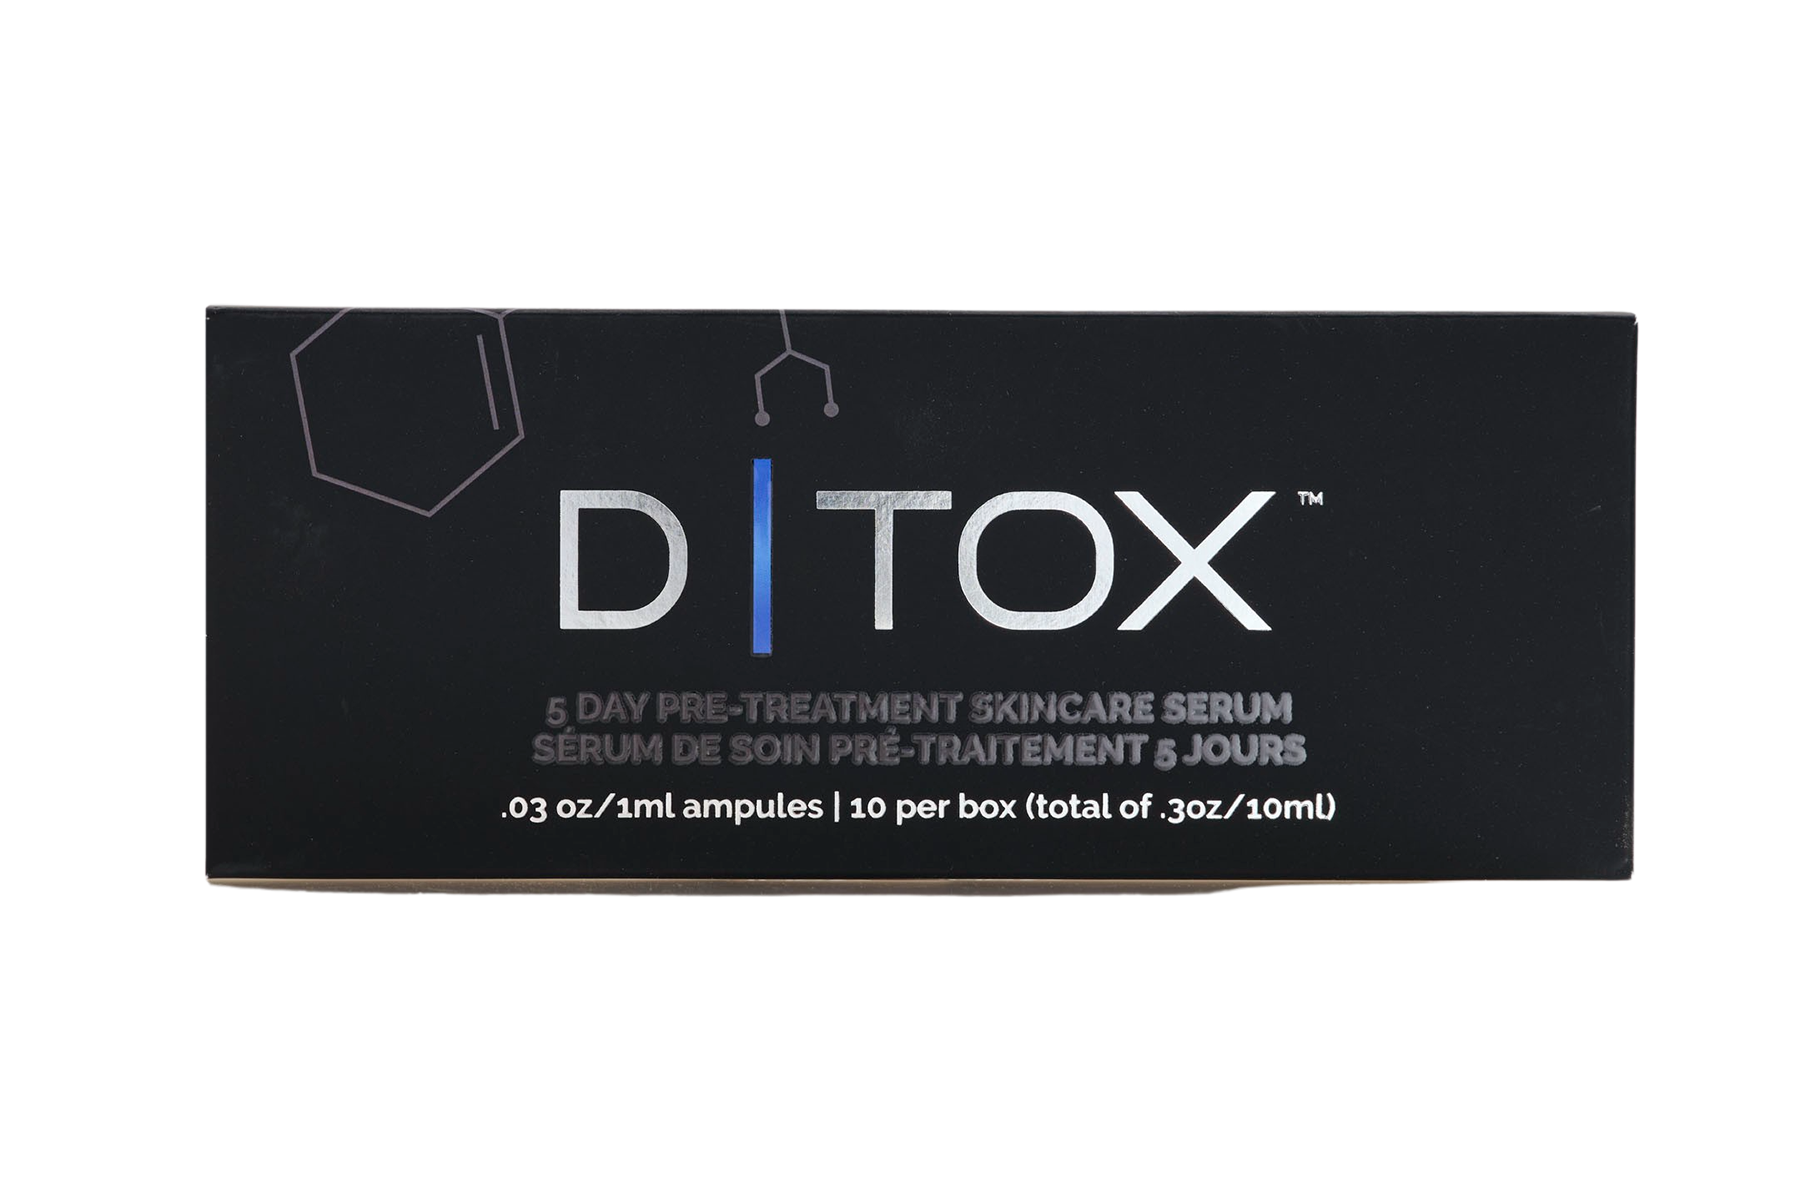 Image of D|TOX 5 day pre-treatment serum